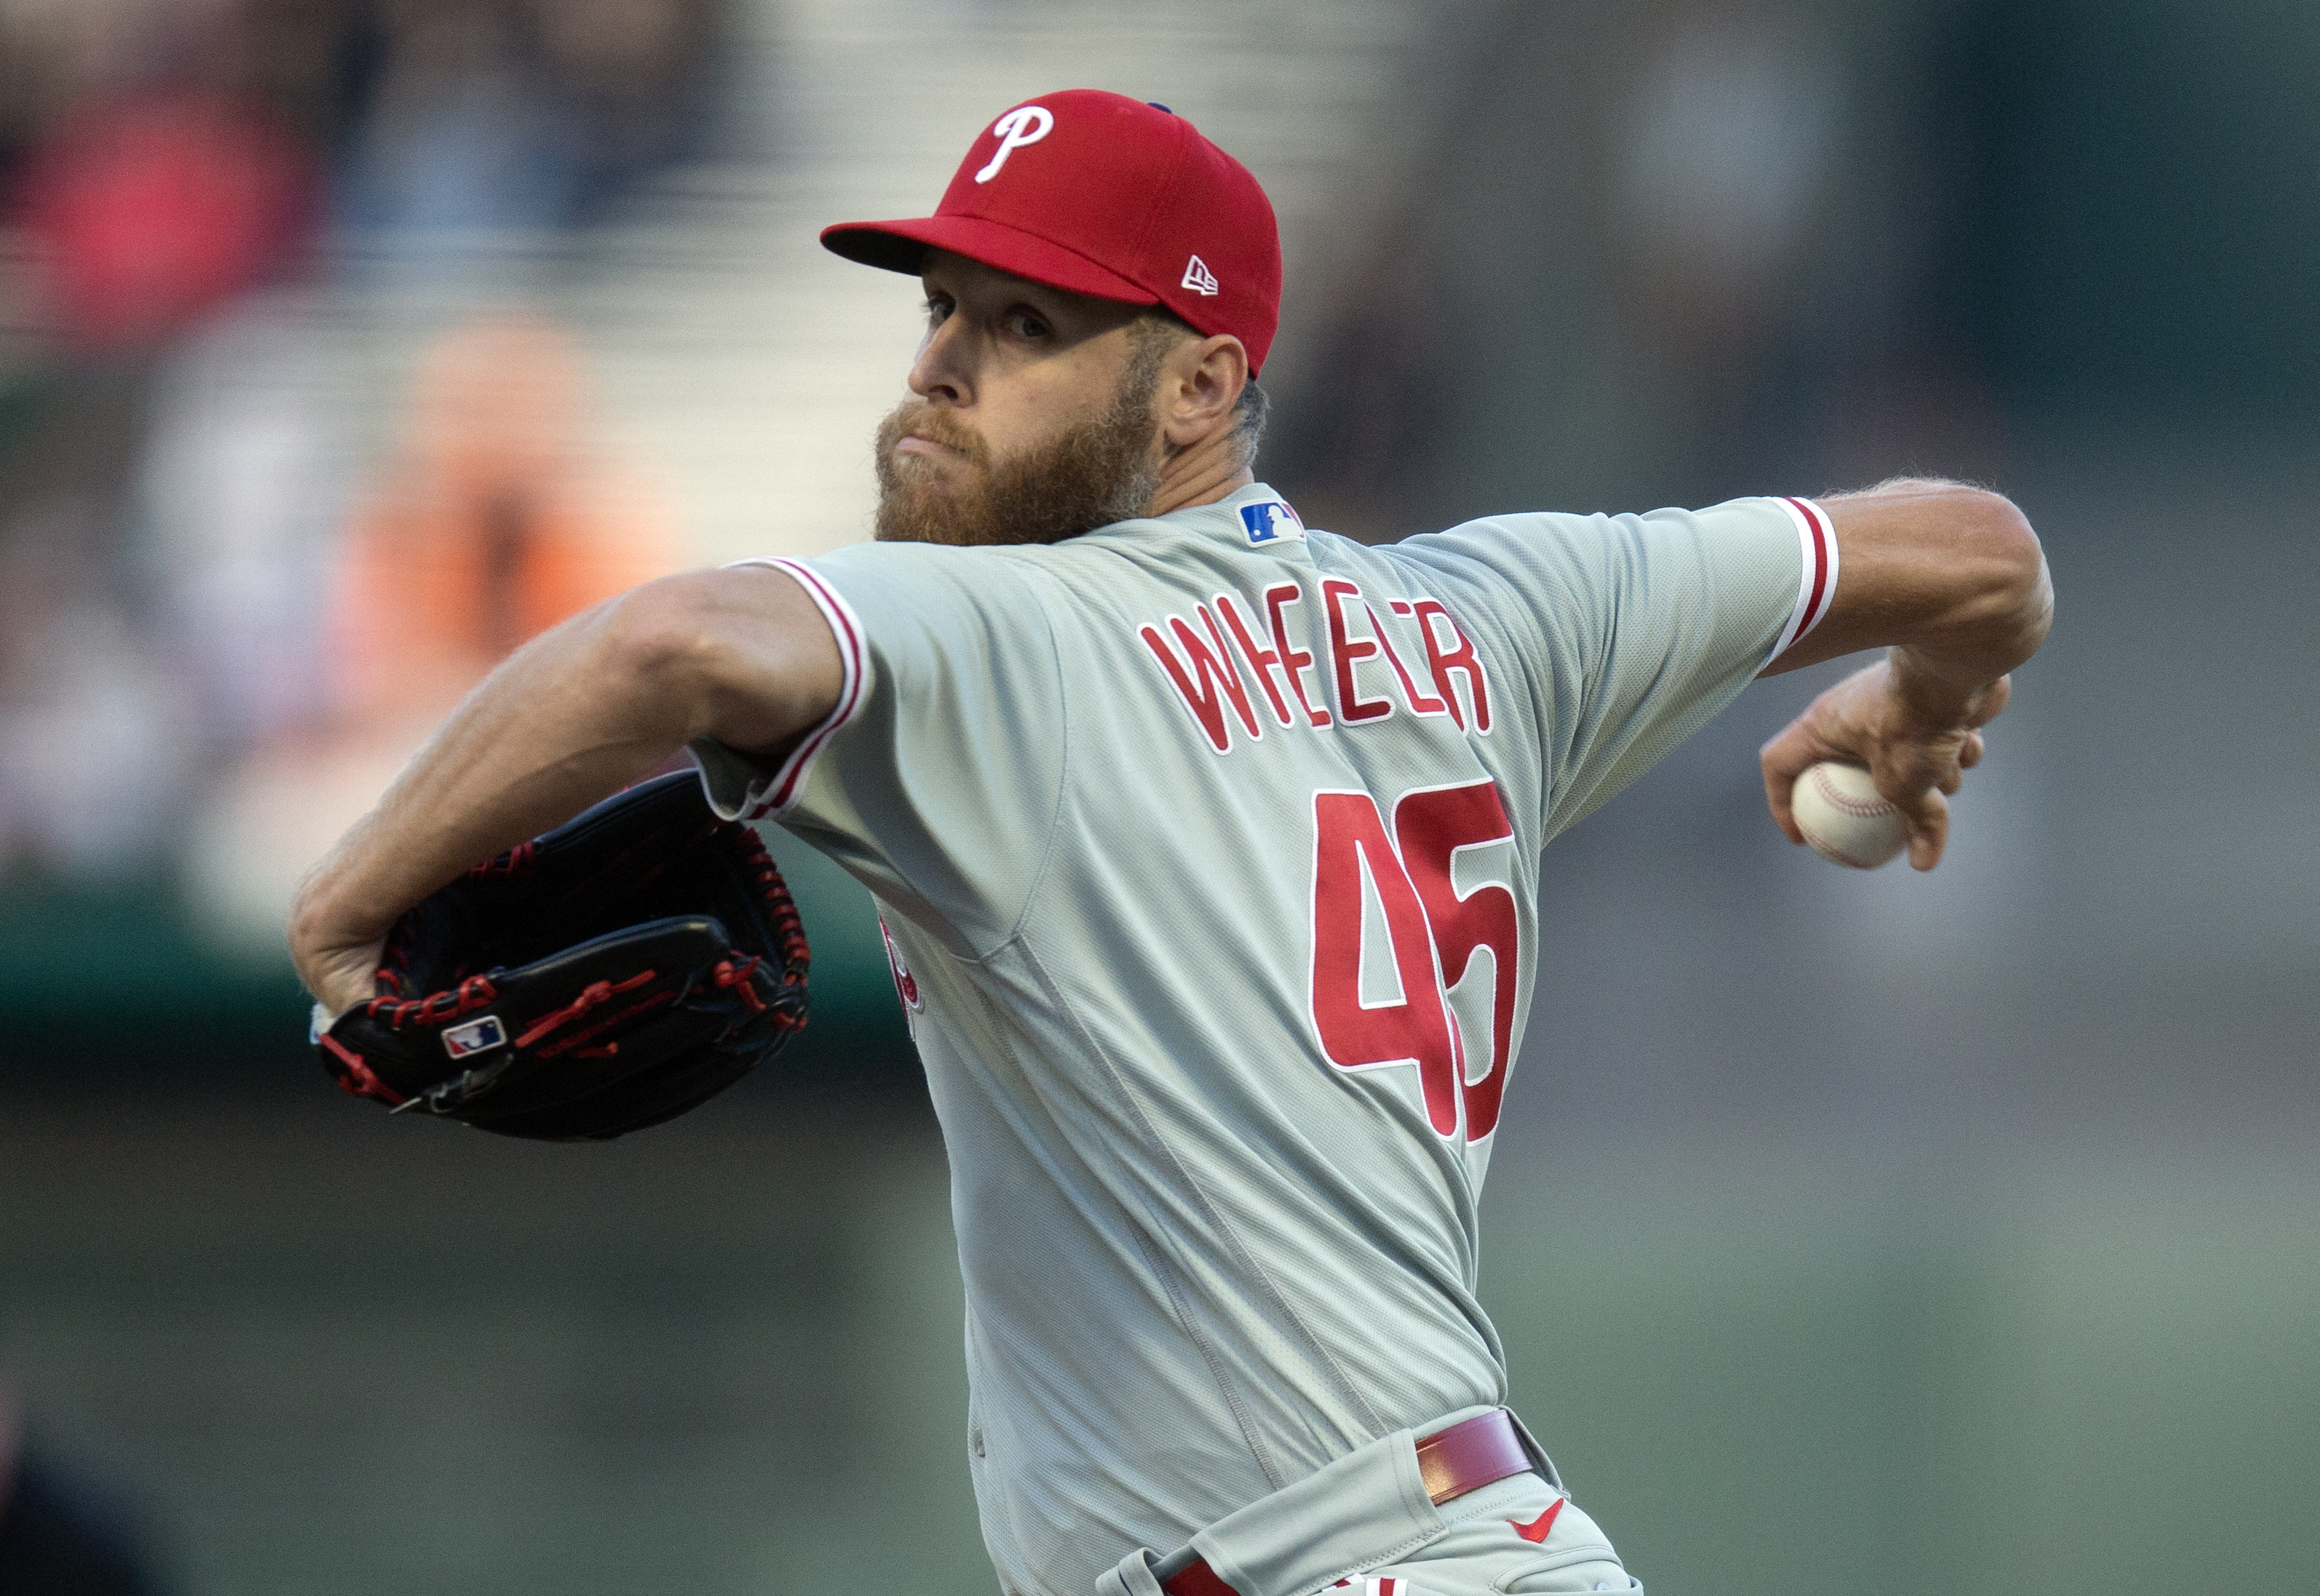 Philadelphia Phillies Lineup Gets Major Shake-Up Ahead of Texas Rangers  Series, Alec Bohm Kyle Schwarber Lead Off - Sports Illustrated Inside The  Phillies